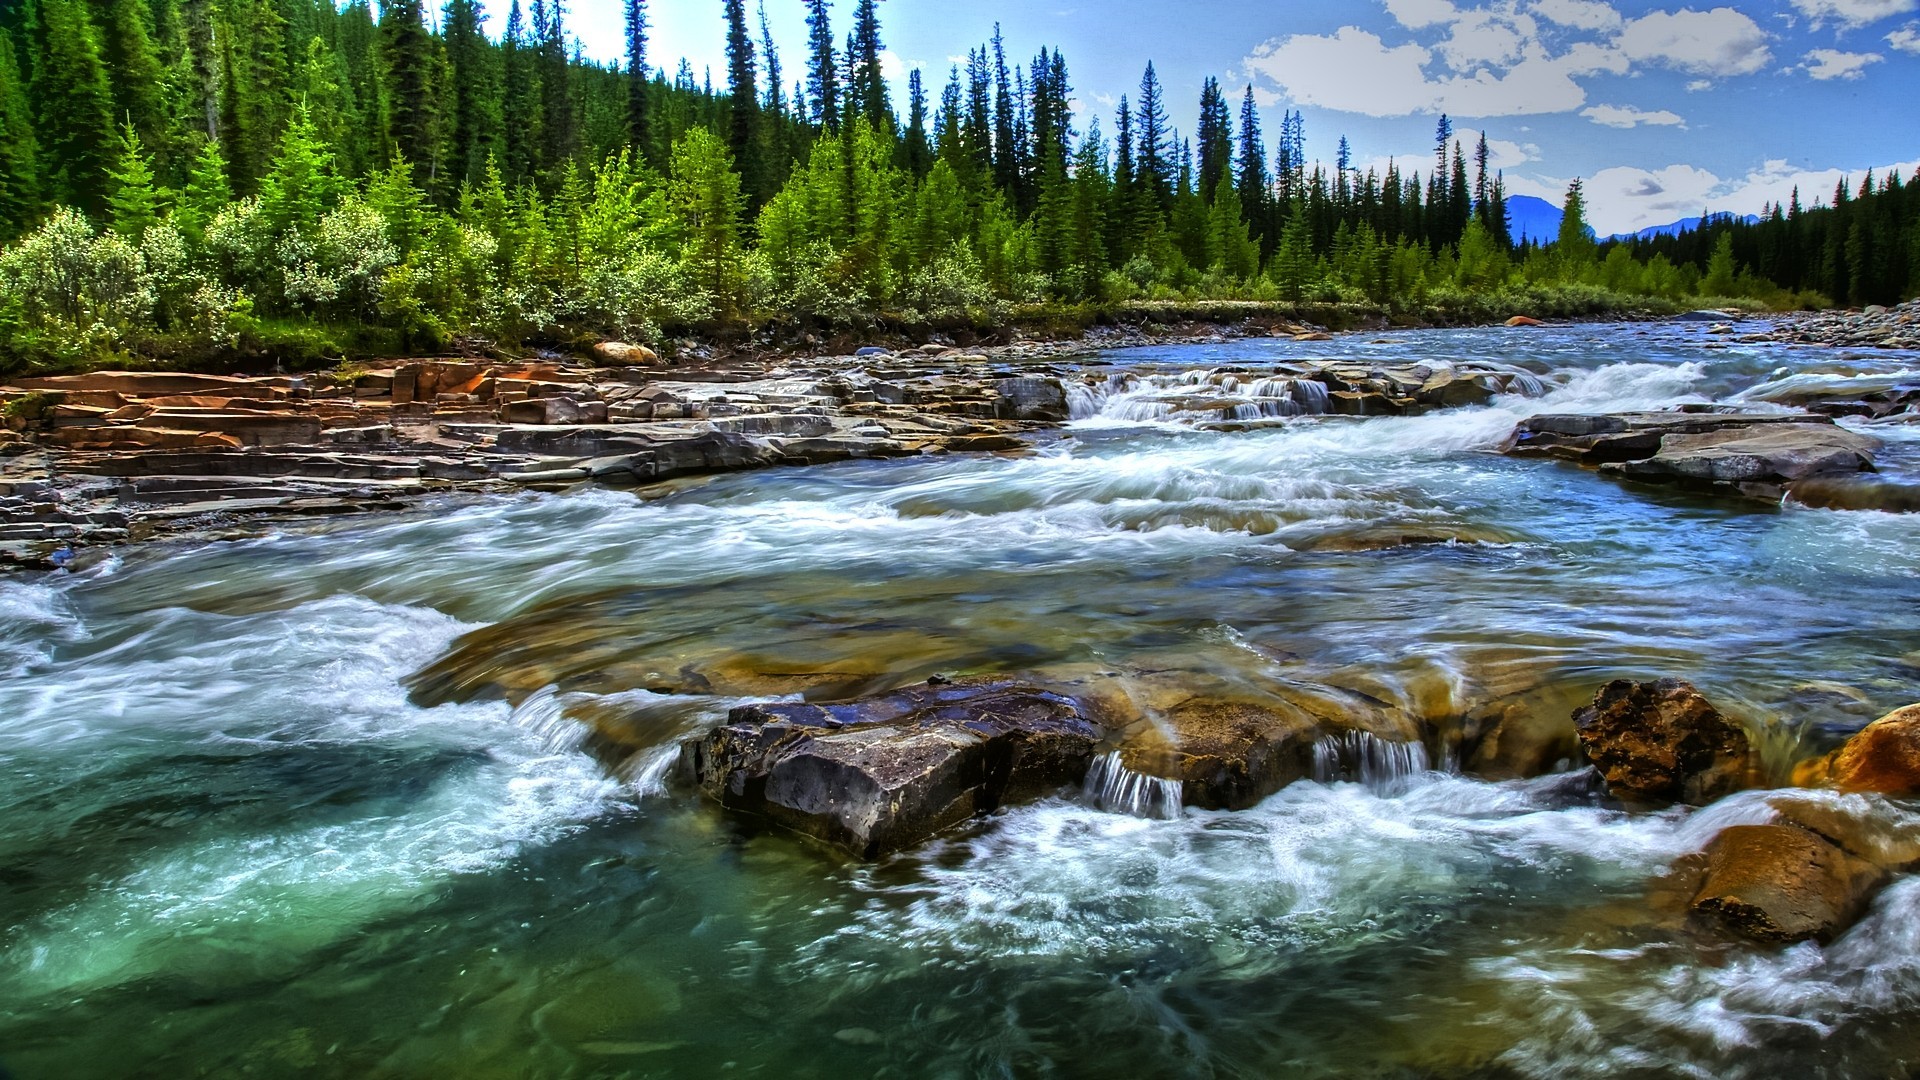 General 1920x1080 landscape river water nature trees stream